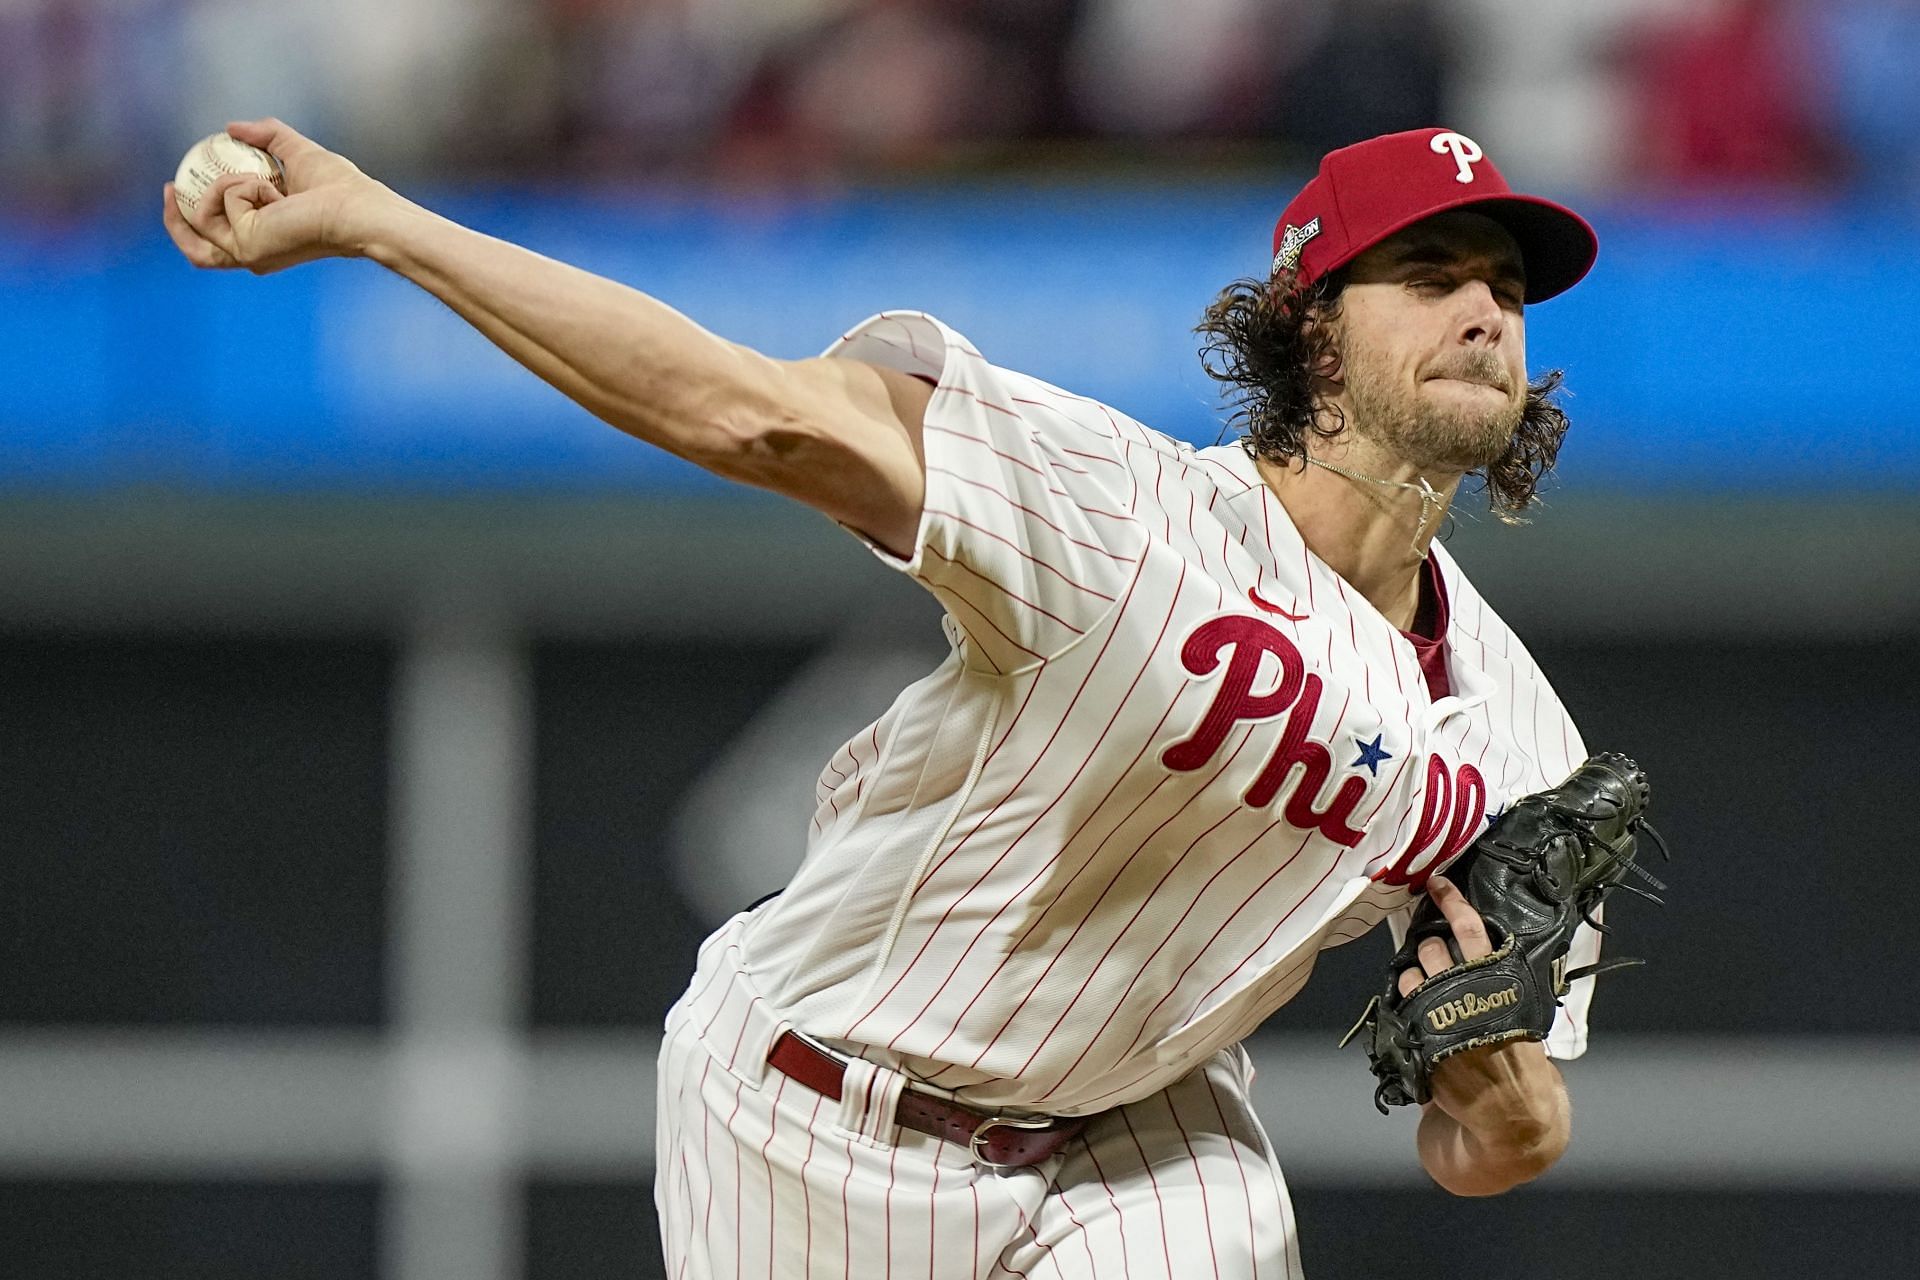 Phillies ace, Aaron Nola showcased a dominant performance in Game 2 of the NLCS against the Arizona Diamondbacks.